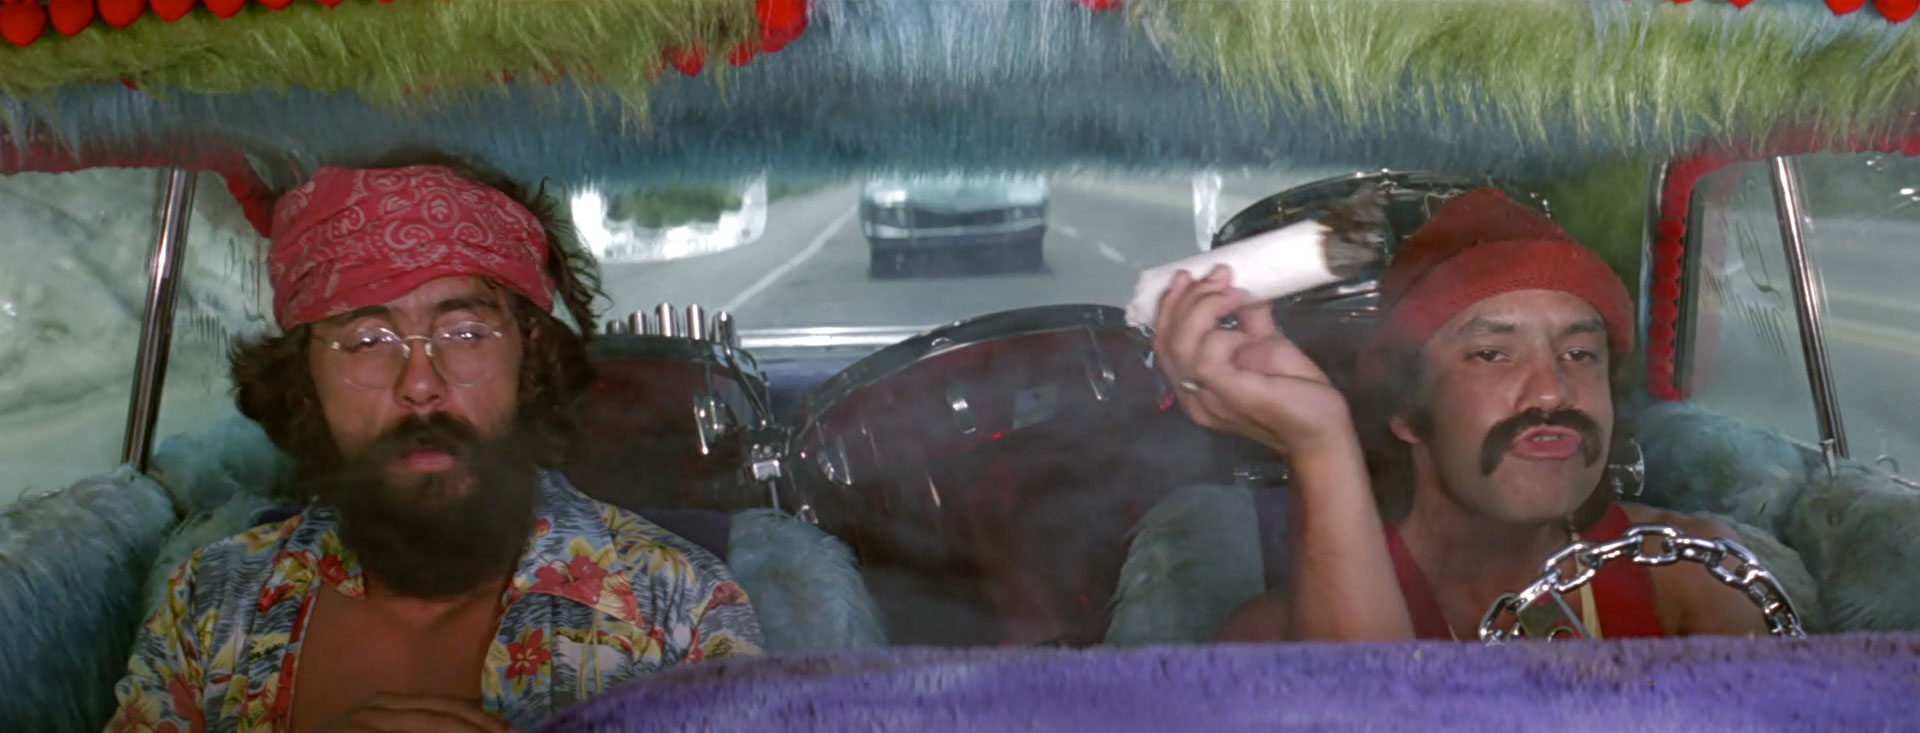 Cheech And Chong Backgrounds, Compatible - PC, Mobile, Gadgets| 1920x733 px